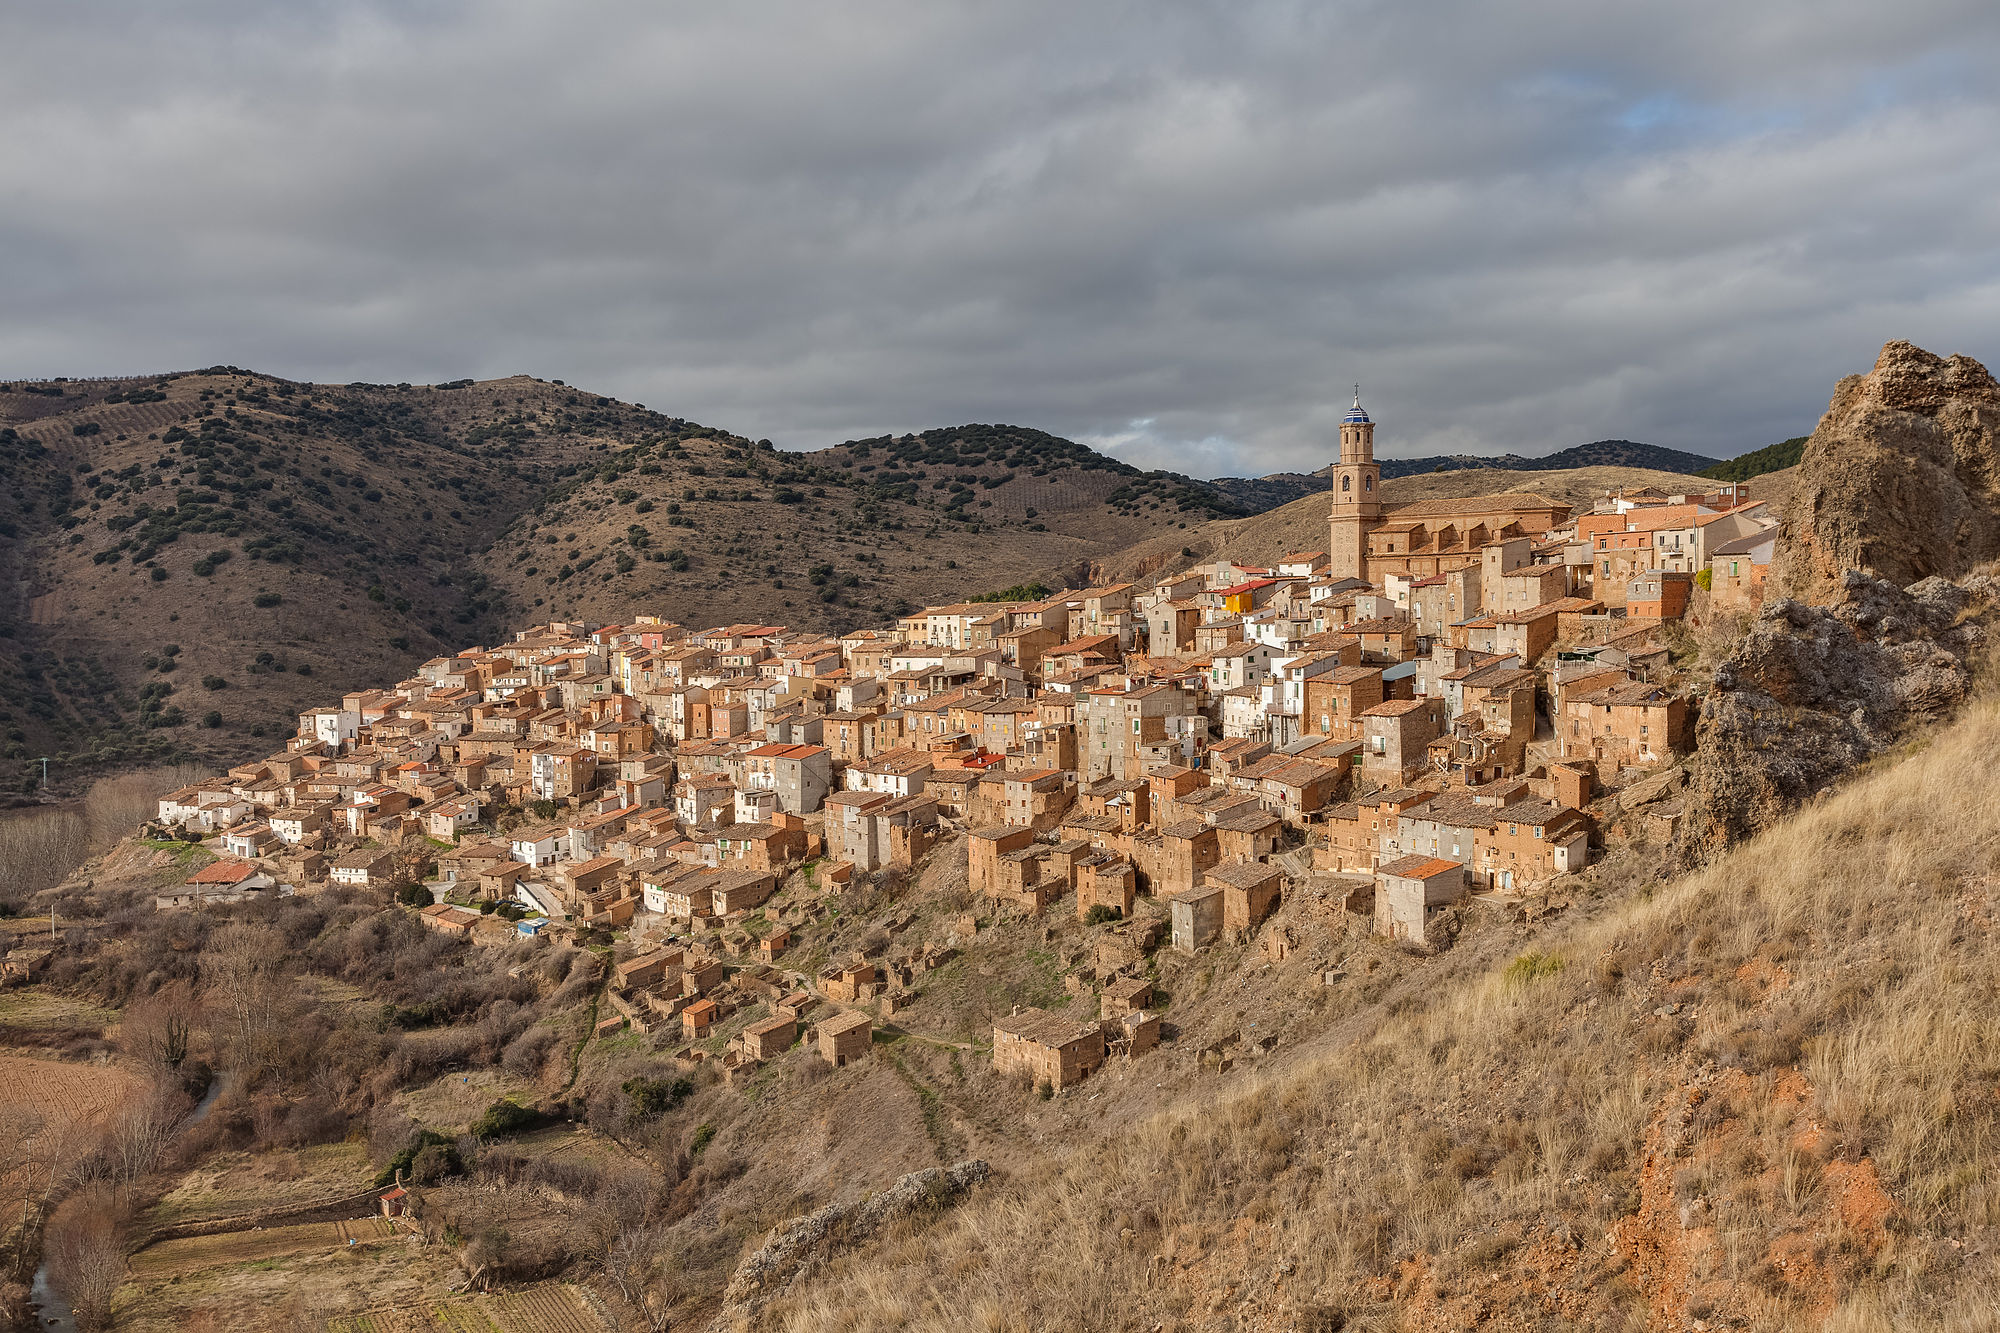 View of the small village of Moros, province of Zaragoza, Aragon, Spain. The whole village of Moros lies on a hill, with the most relevant buildings in the top (church and former town hall), the residences in the middle and the sheep pens at the bottom. The current population of Moros is 441 people (35% of the population one century ago, that's why many houses are abandoned).